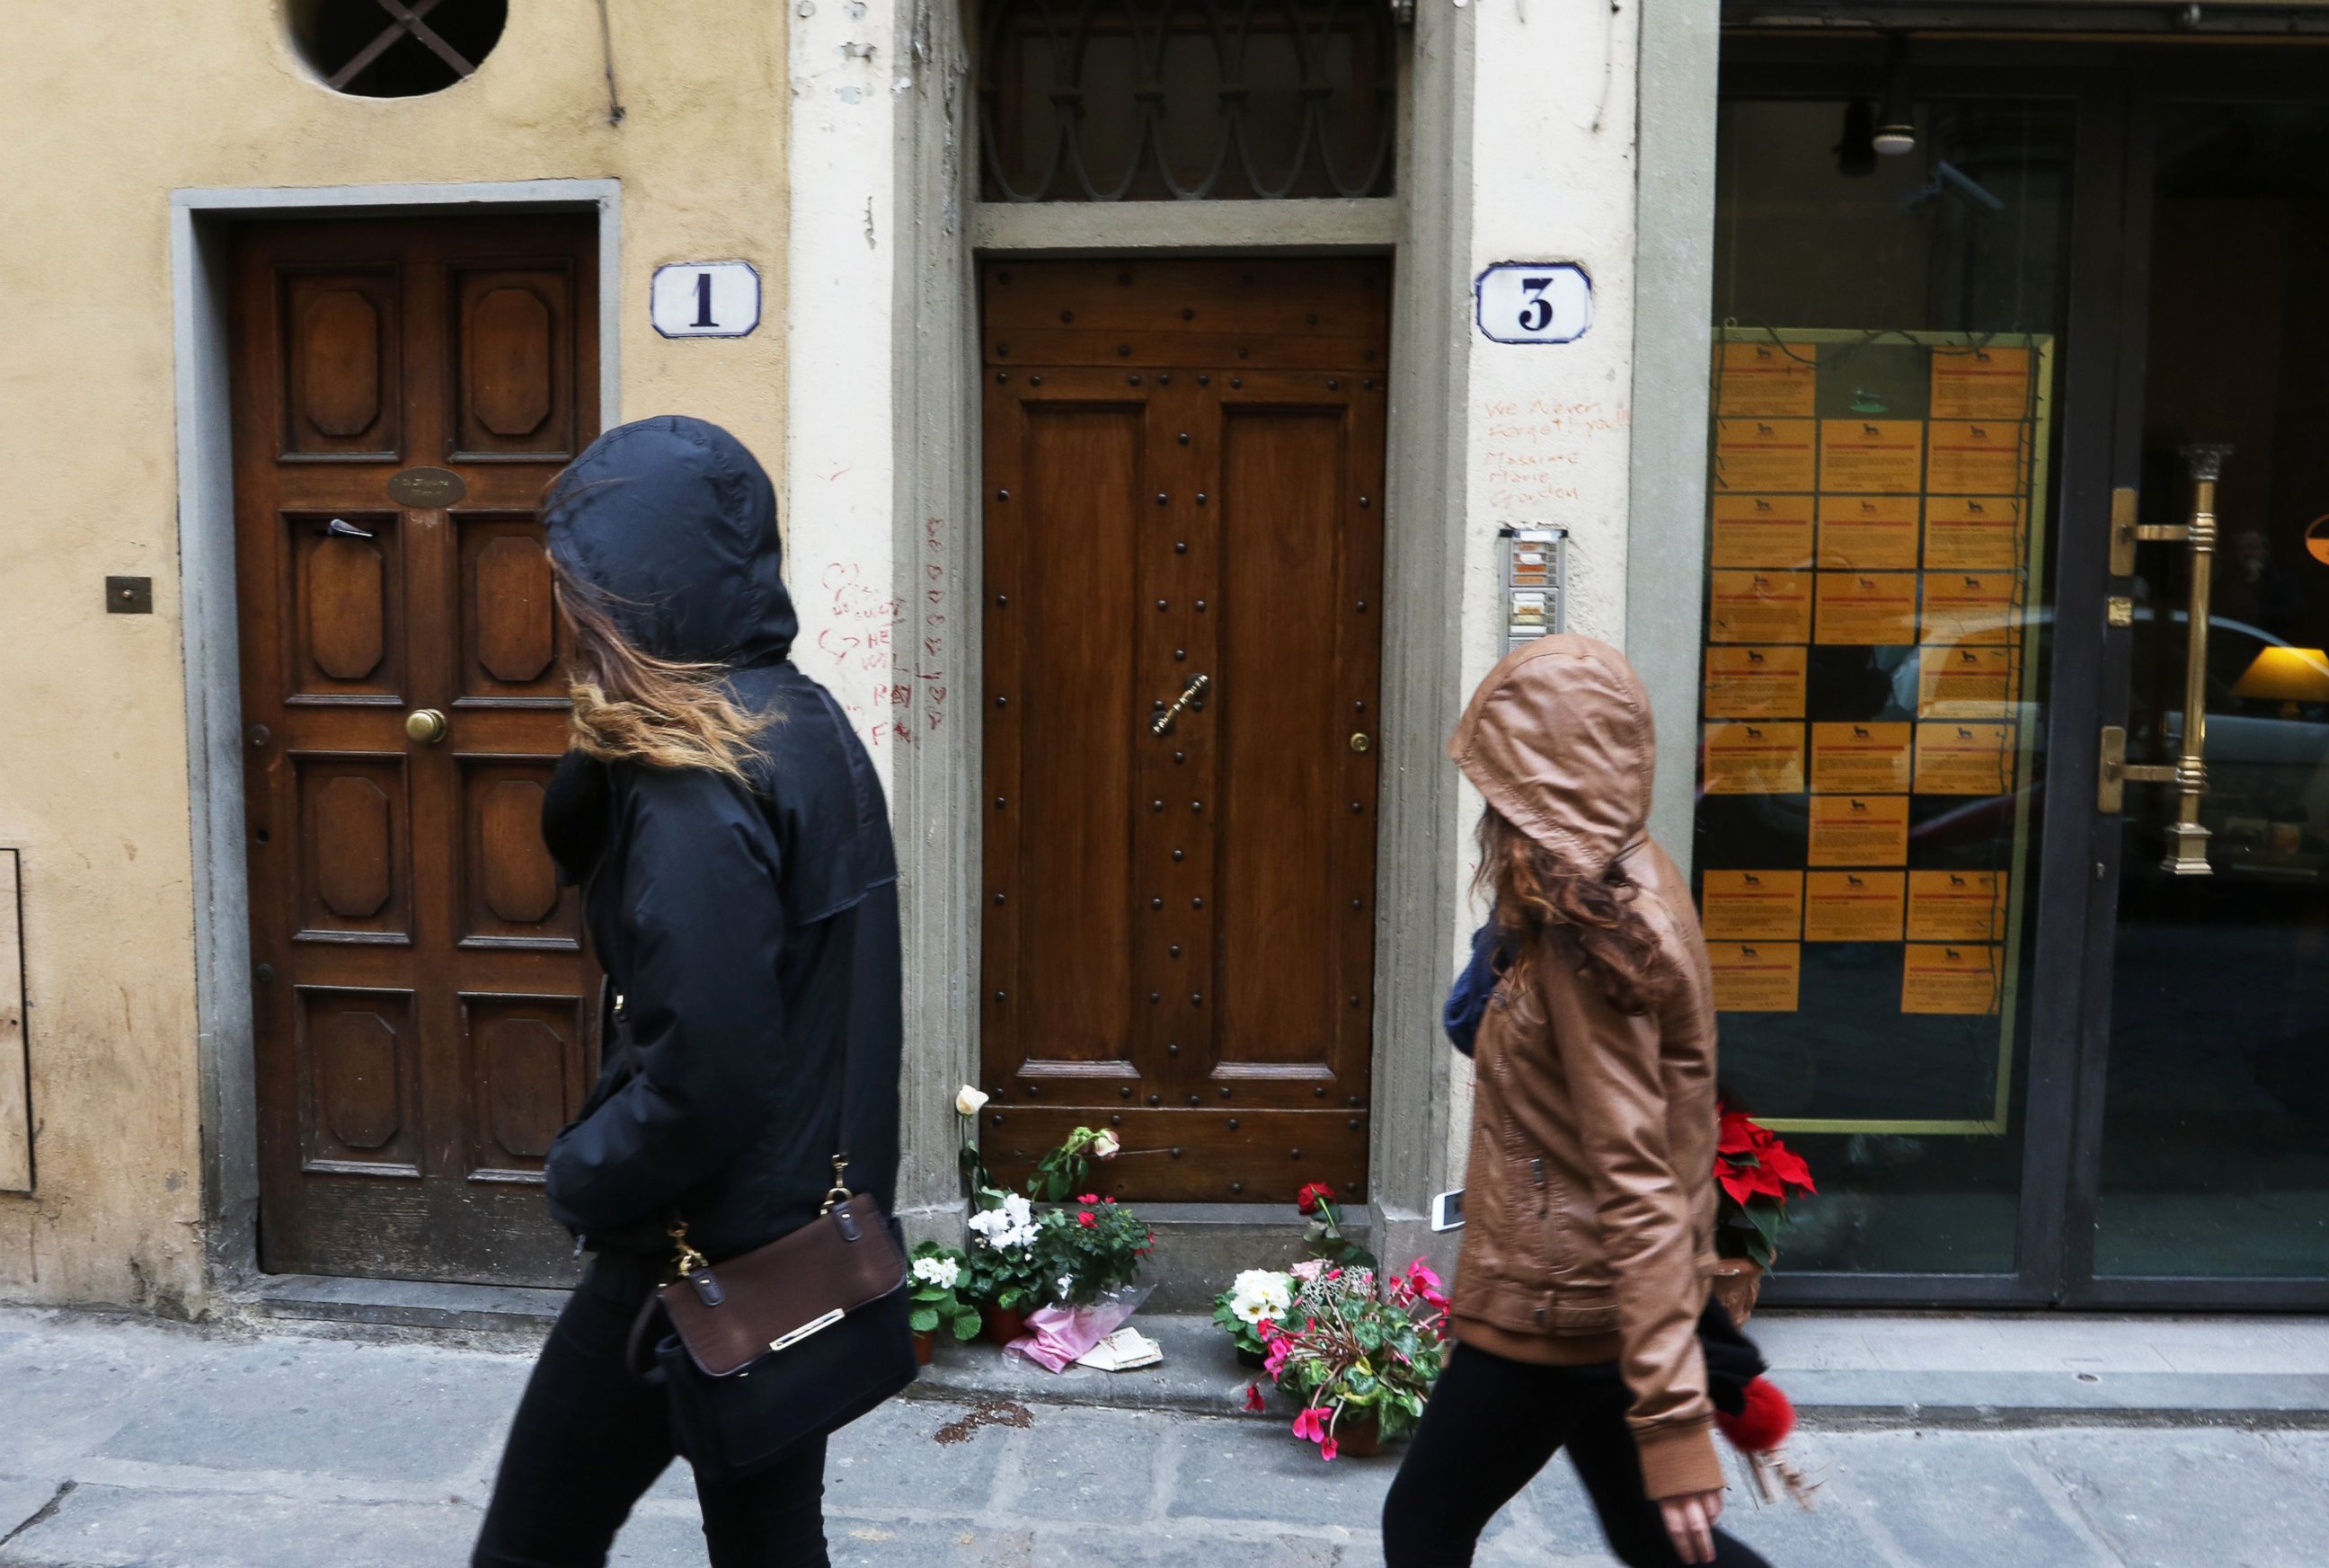 PHOTO: Two women walk past the entrance to the building that houses the flat of Ashley Olsen, a 35-year-old American expatriate artist who was found dead on Jan. 9, in Florence, Italy, on January 11, 2016. 